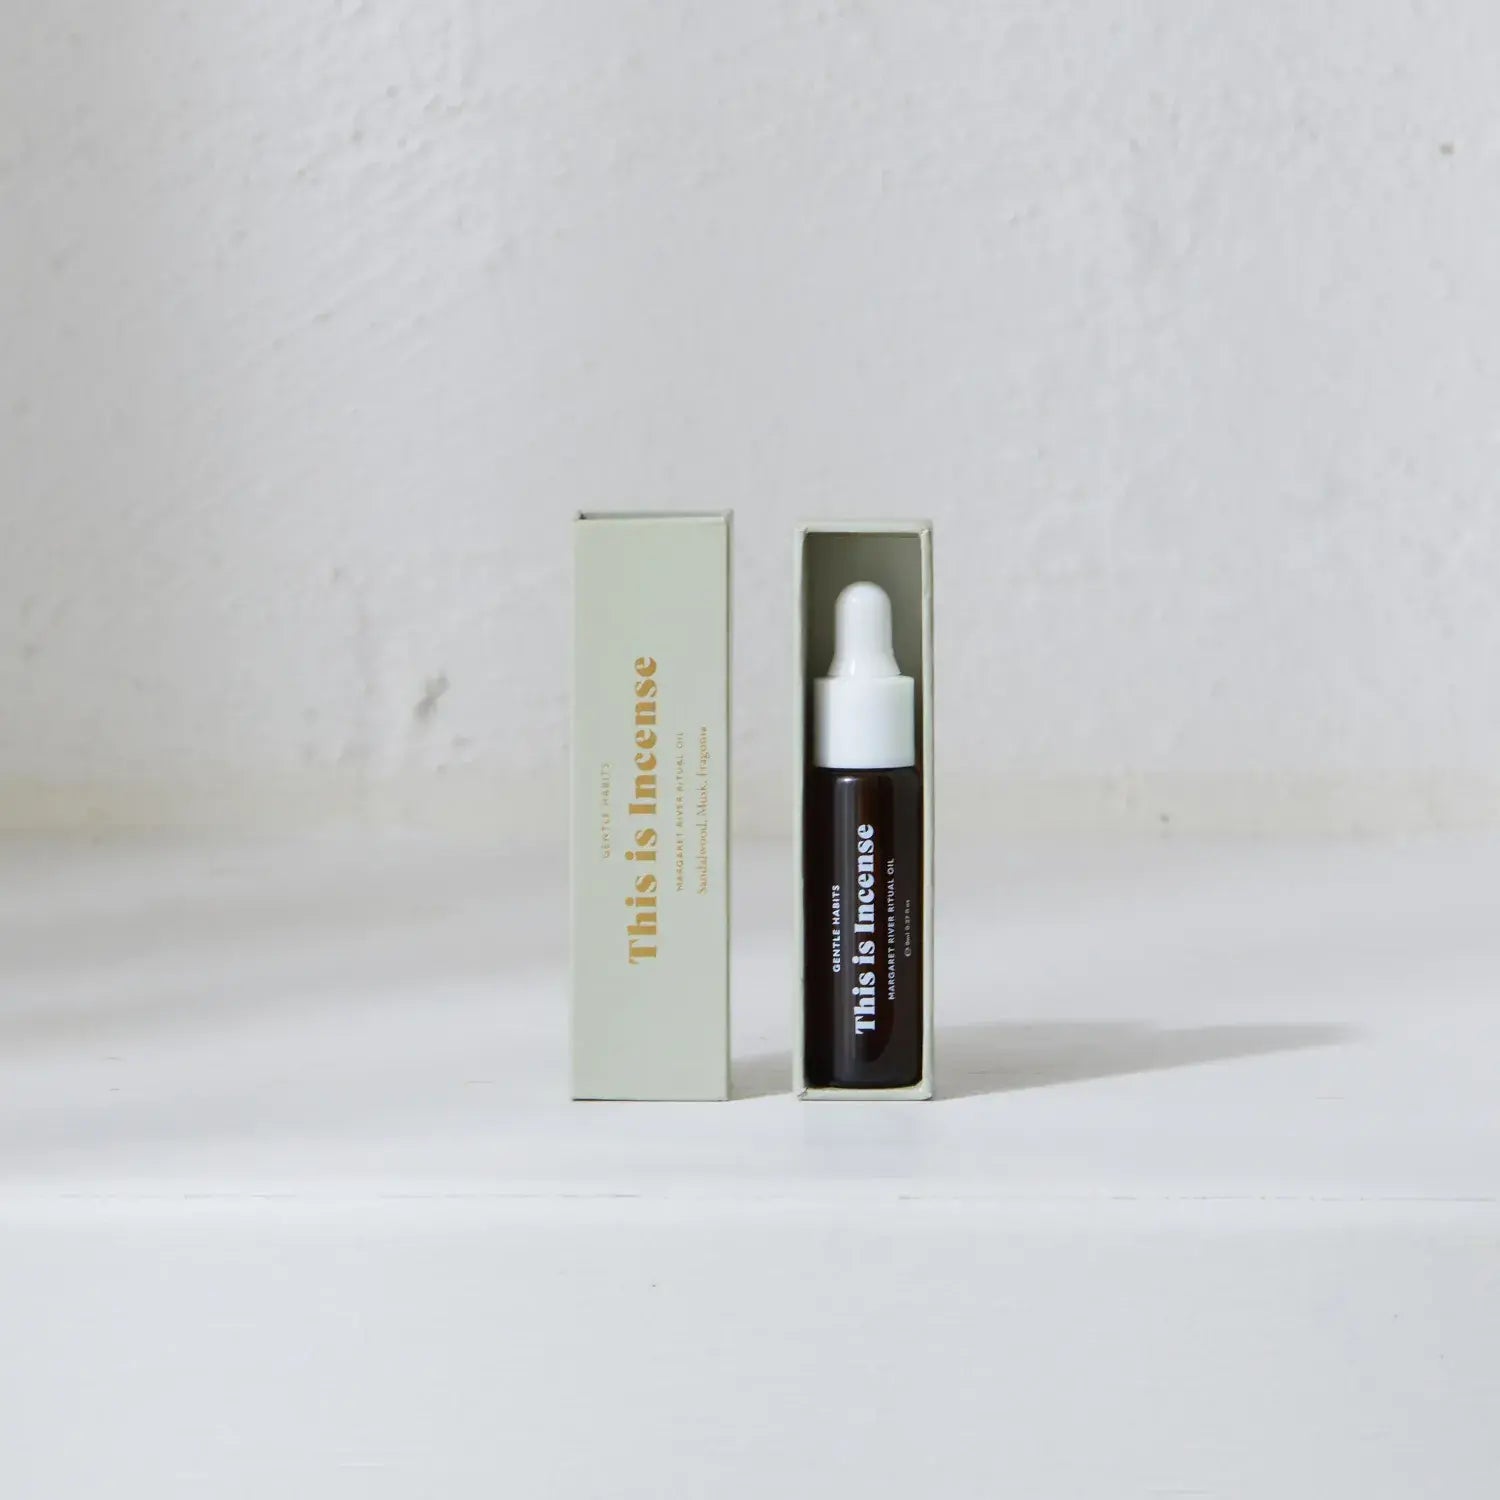 Ritual Diffuser Oil by Gentle Habits - Margaret River 